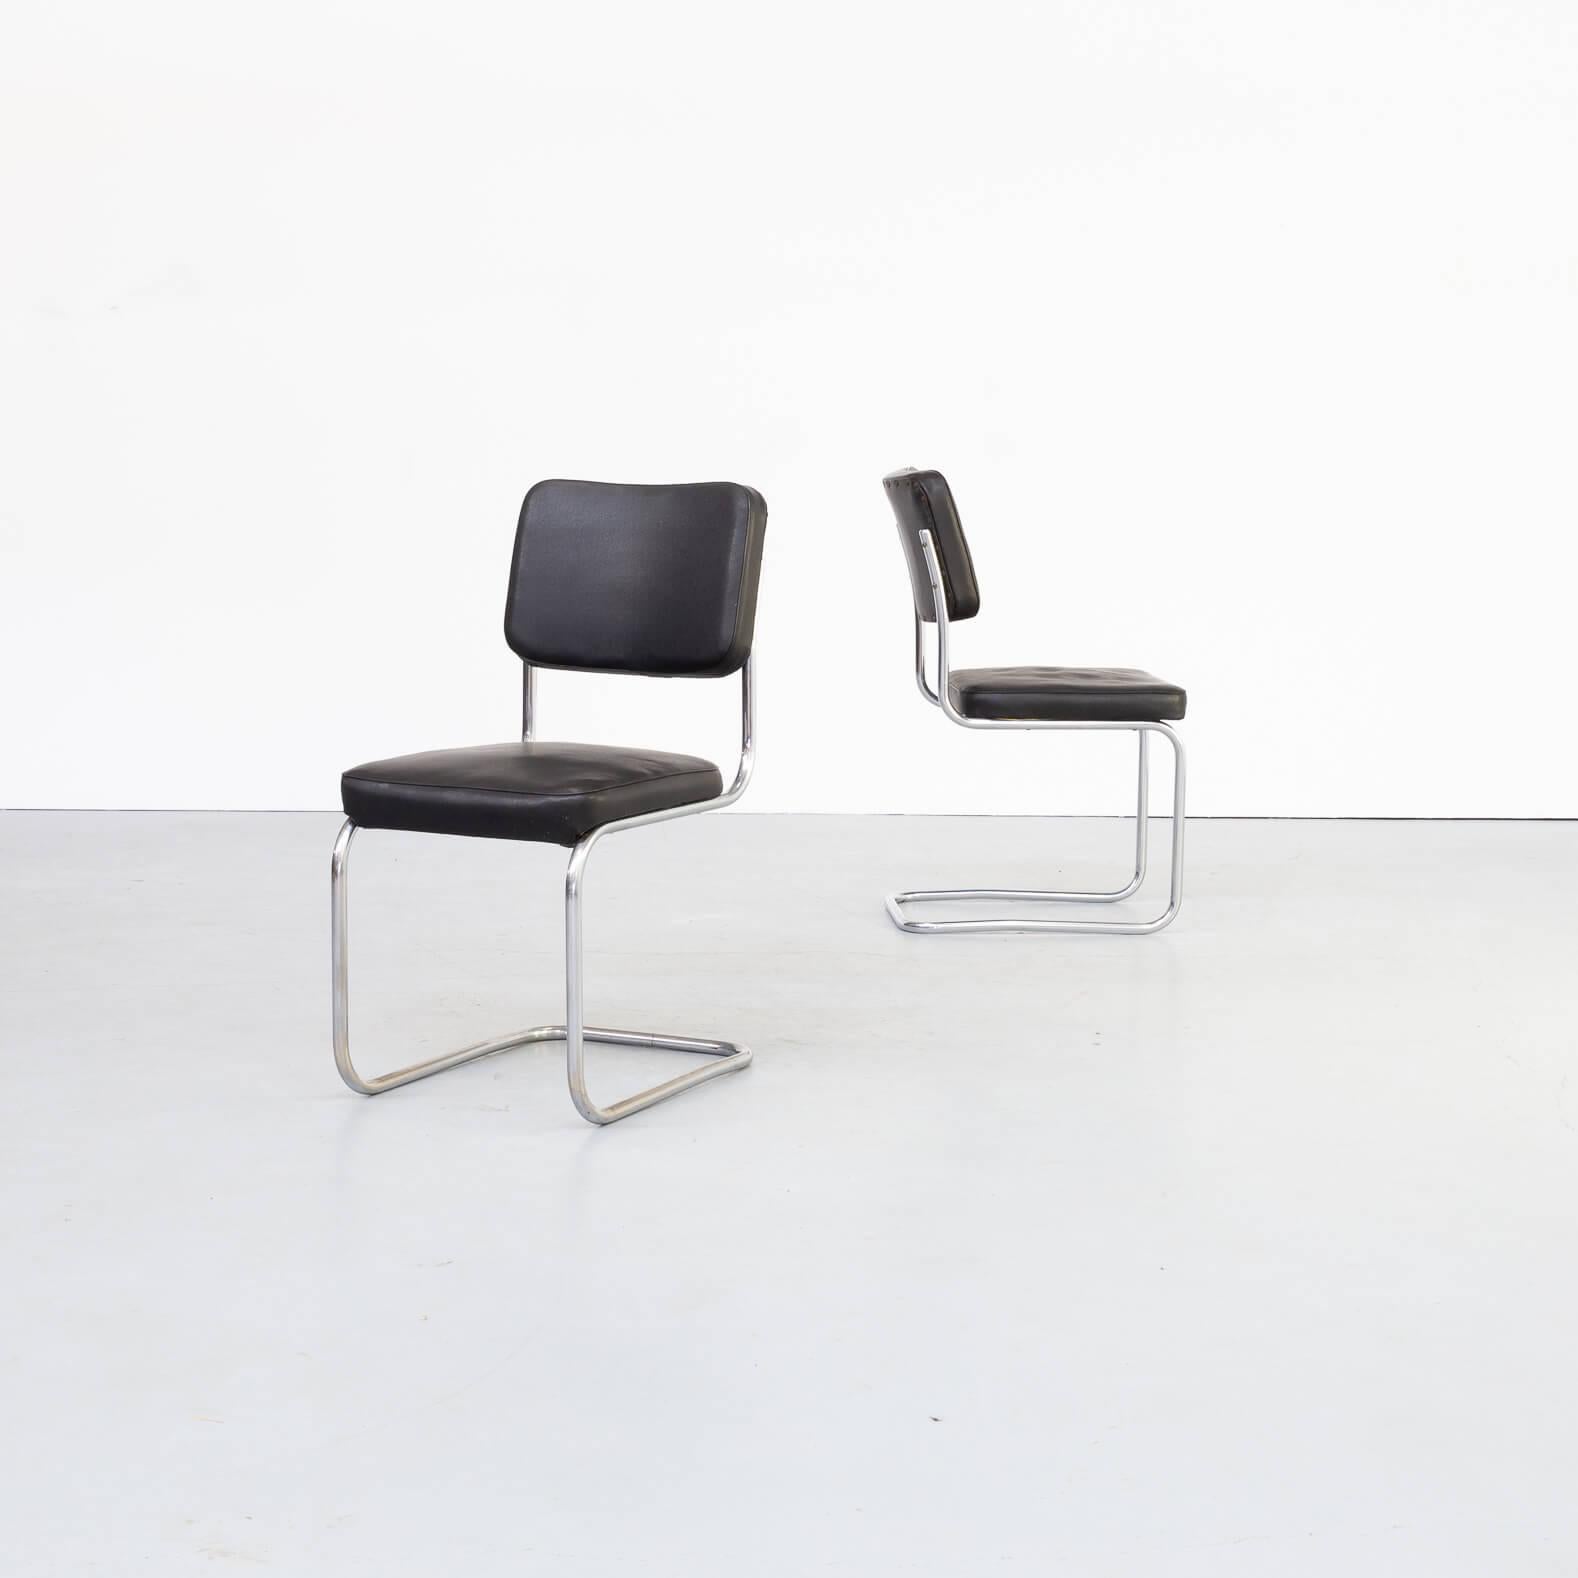 Set of 2 Mart Stam side chairs with black skai finish. Classic chrome cantilever frames.